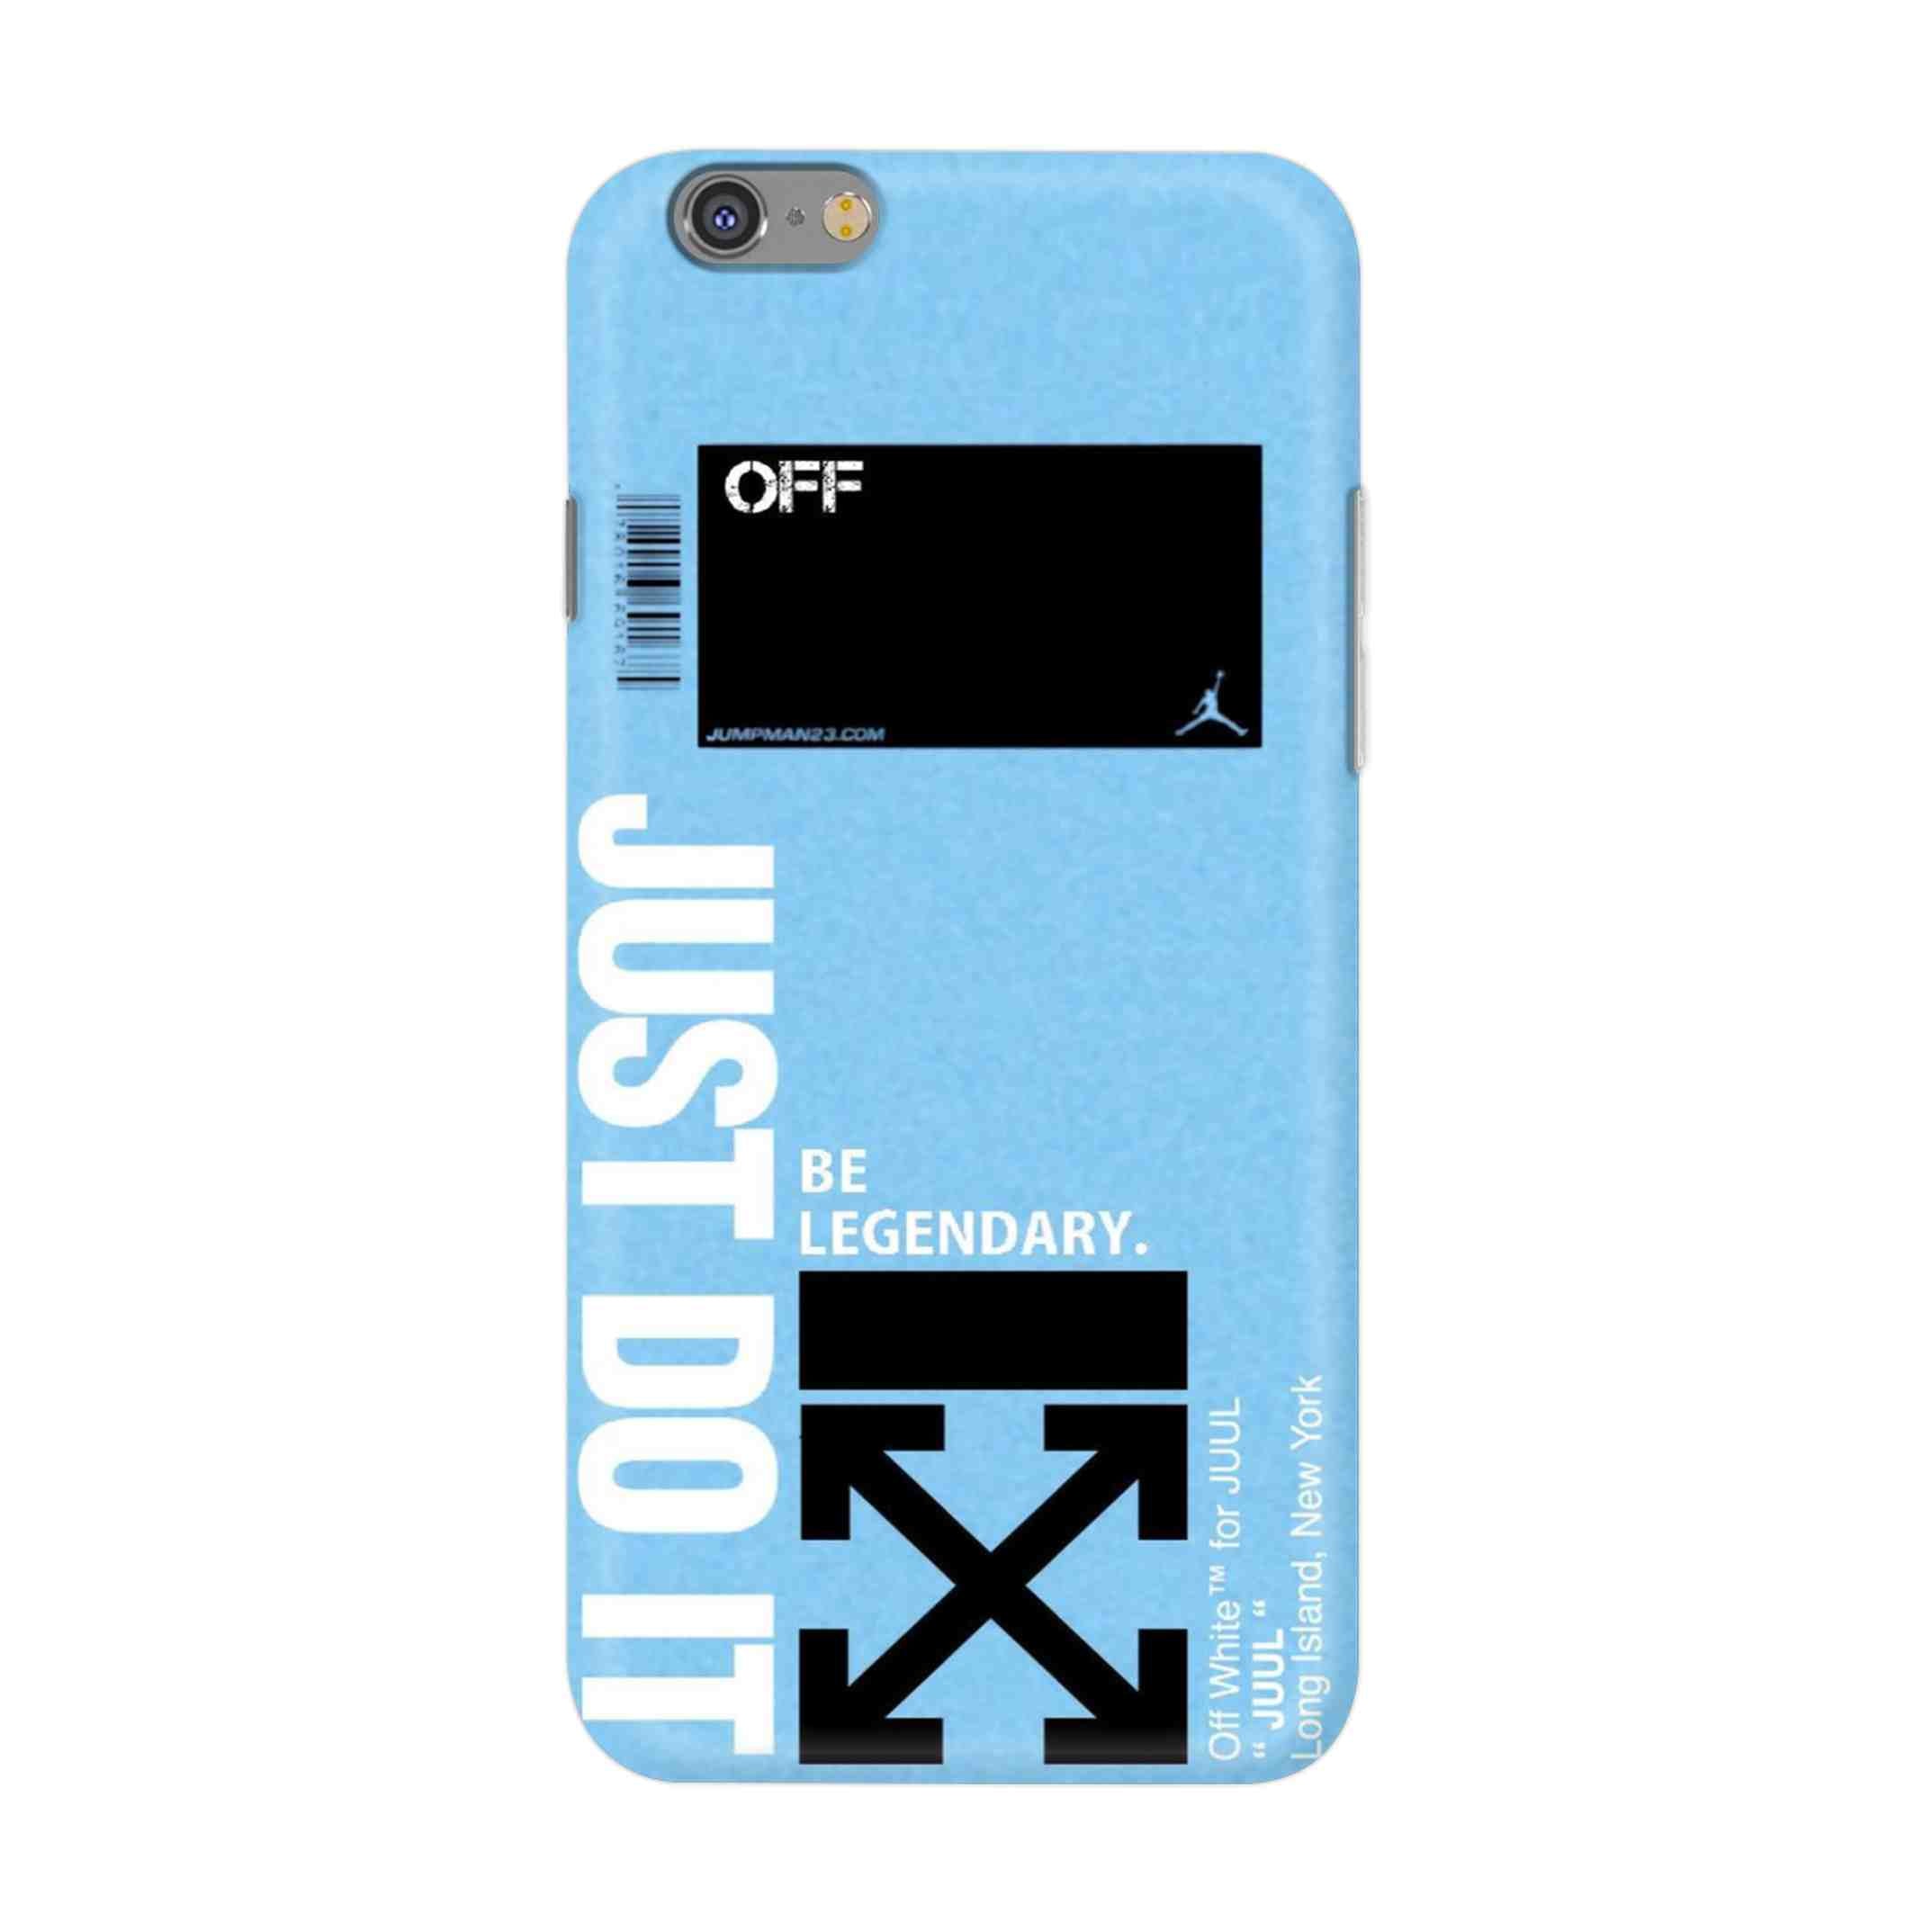 Buy Just Do It Hard Back Mobile Phone Case/Cover For iPhone 6 Plus / 6s Plus Online